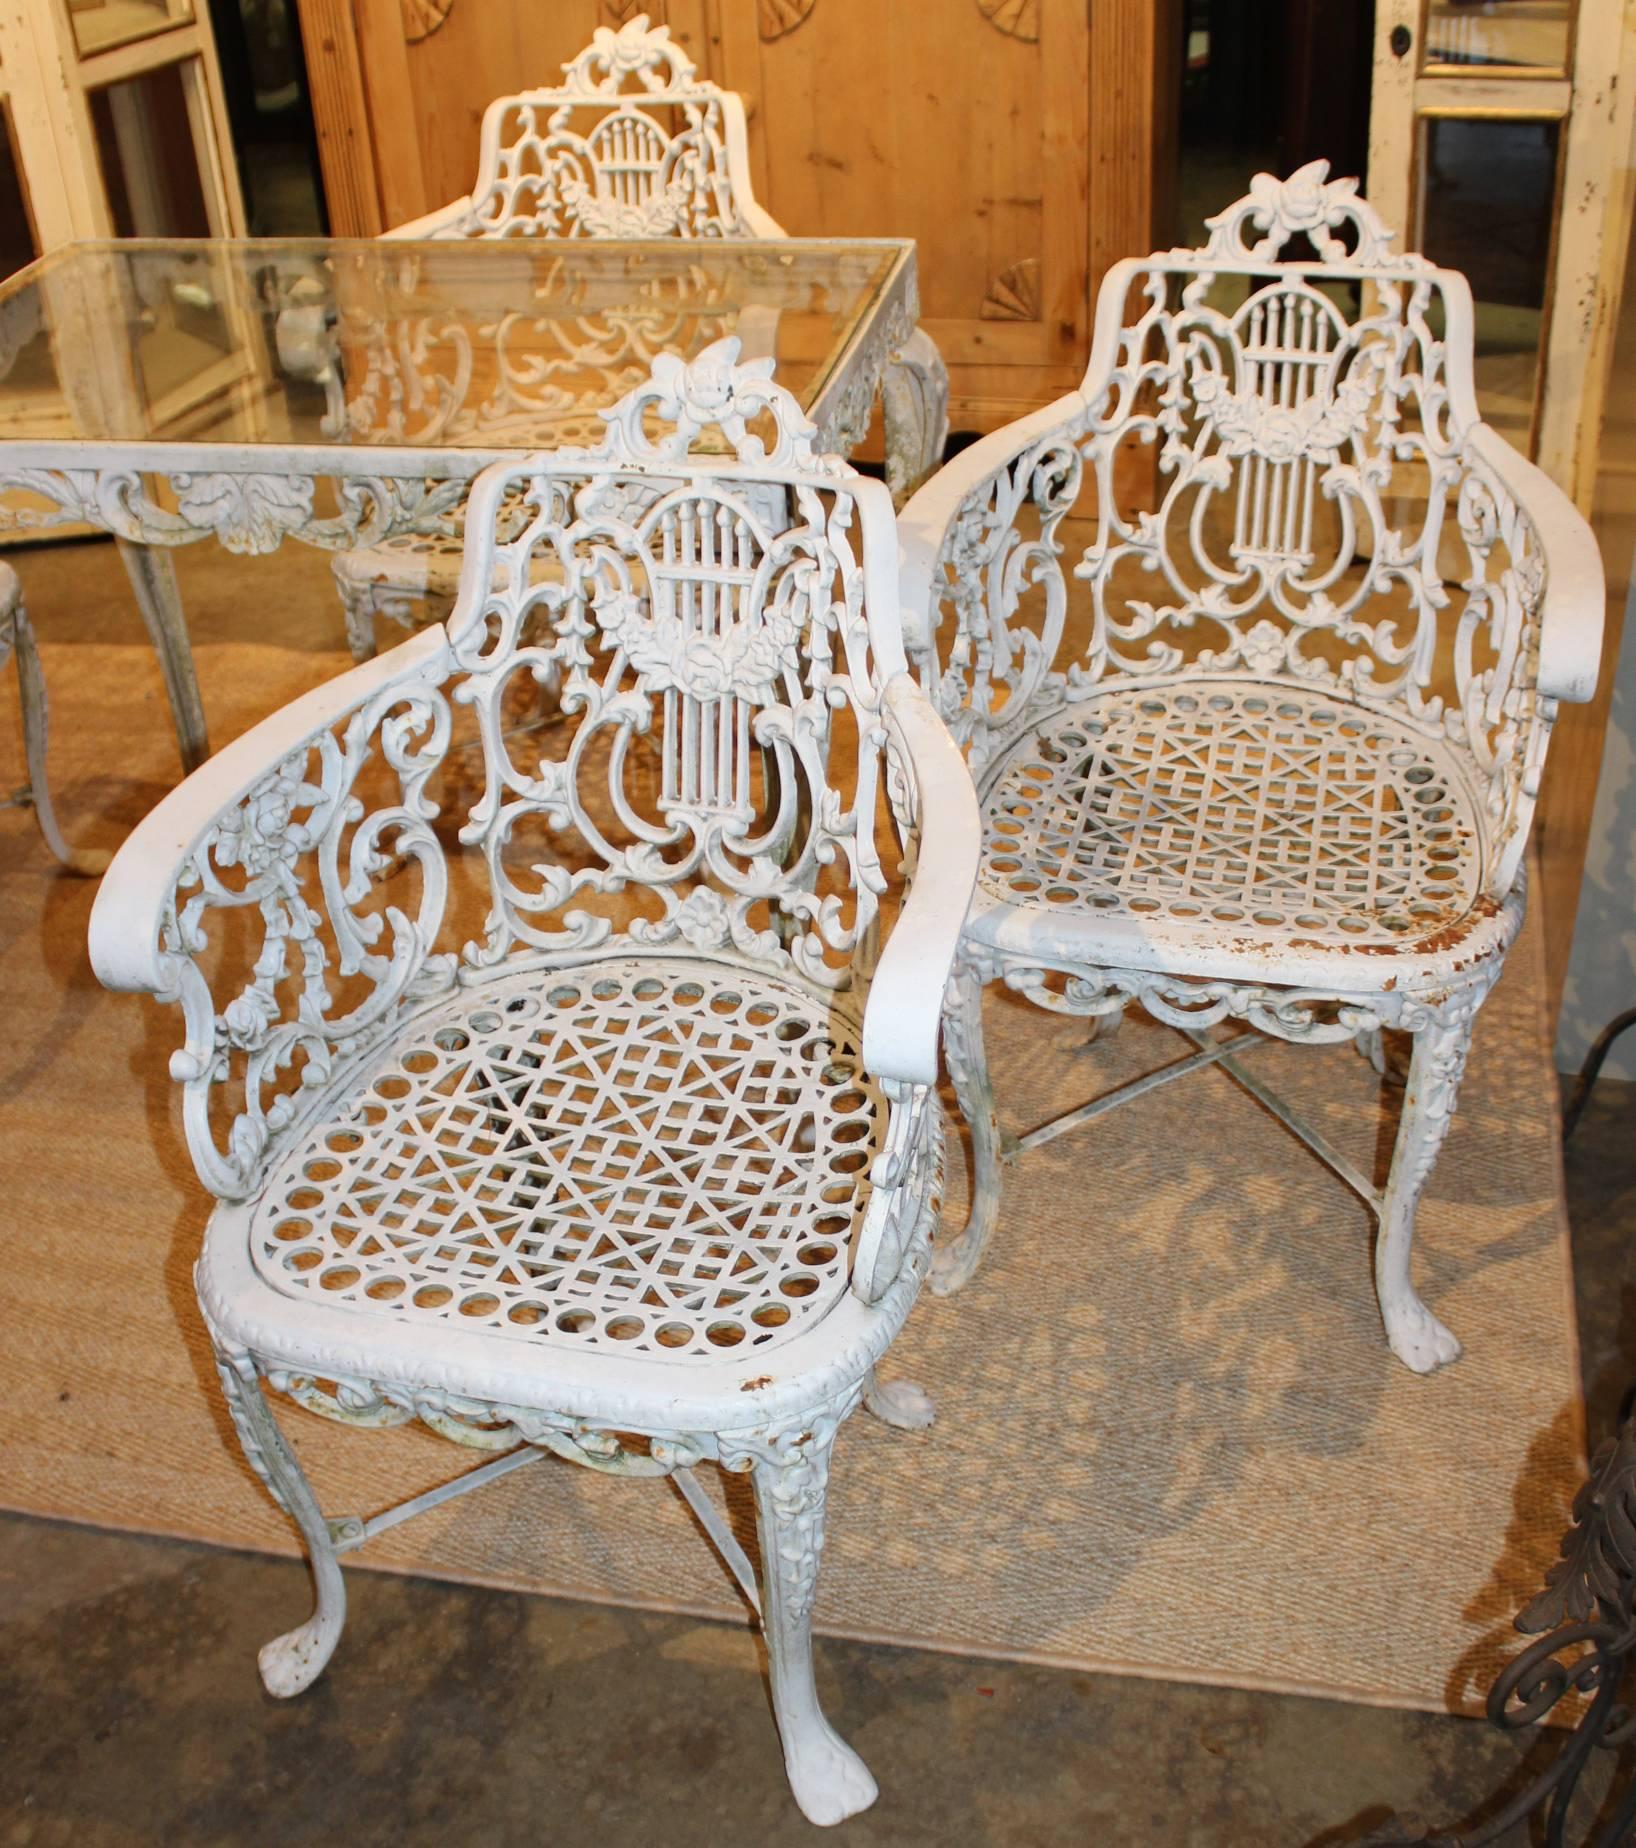 A wonderful heavy cast iron white painted garden set which includes four armchairs and a glass top table, all with scroll decoration and rose crests, along with cabriole legs. Each chair is reinforced with cross stretchers. The set is unsigned, but